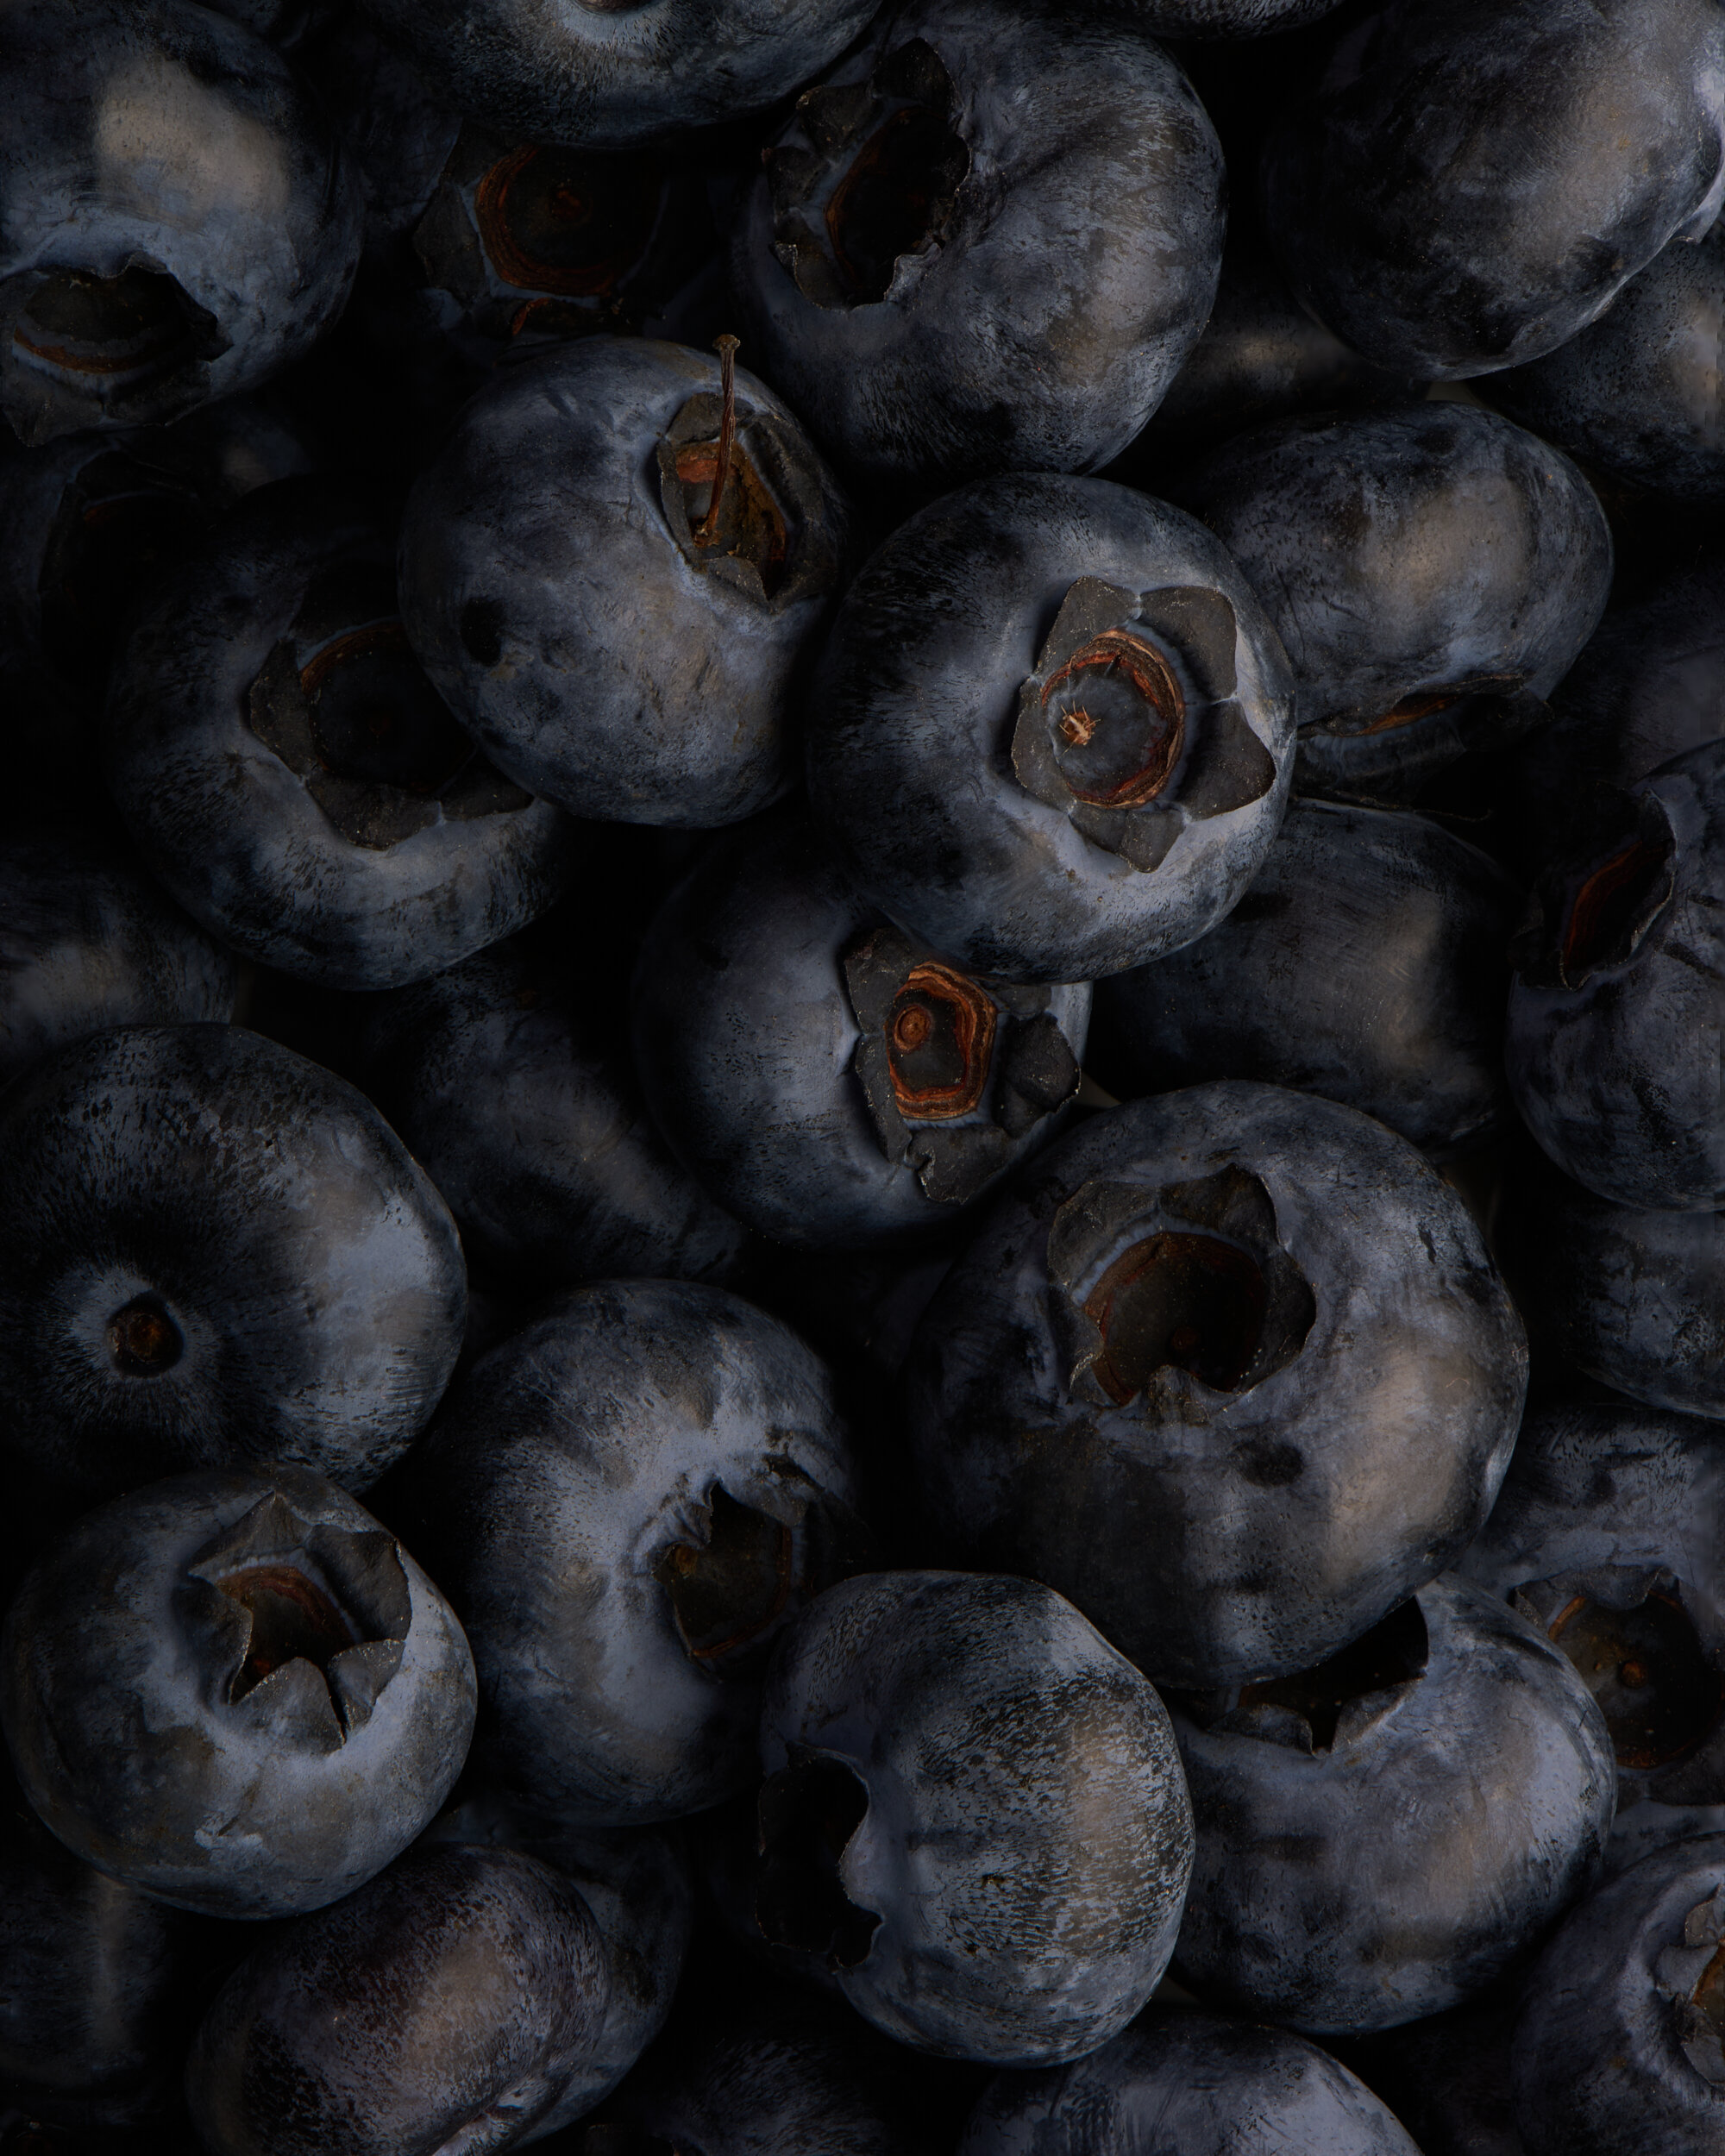 Blueberries by RMcCormick